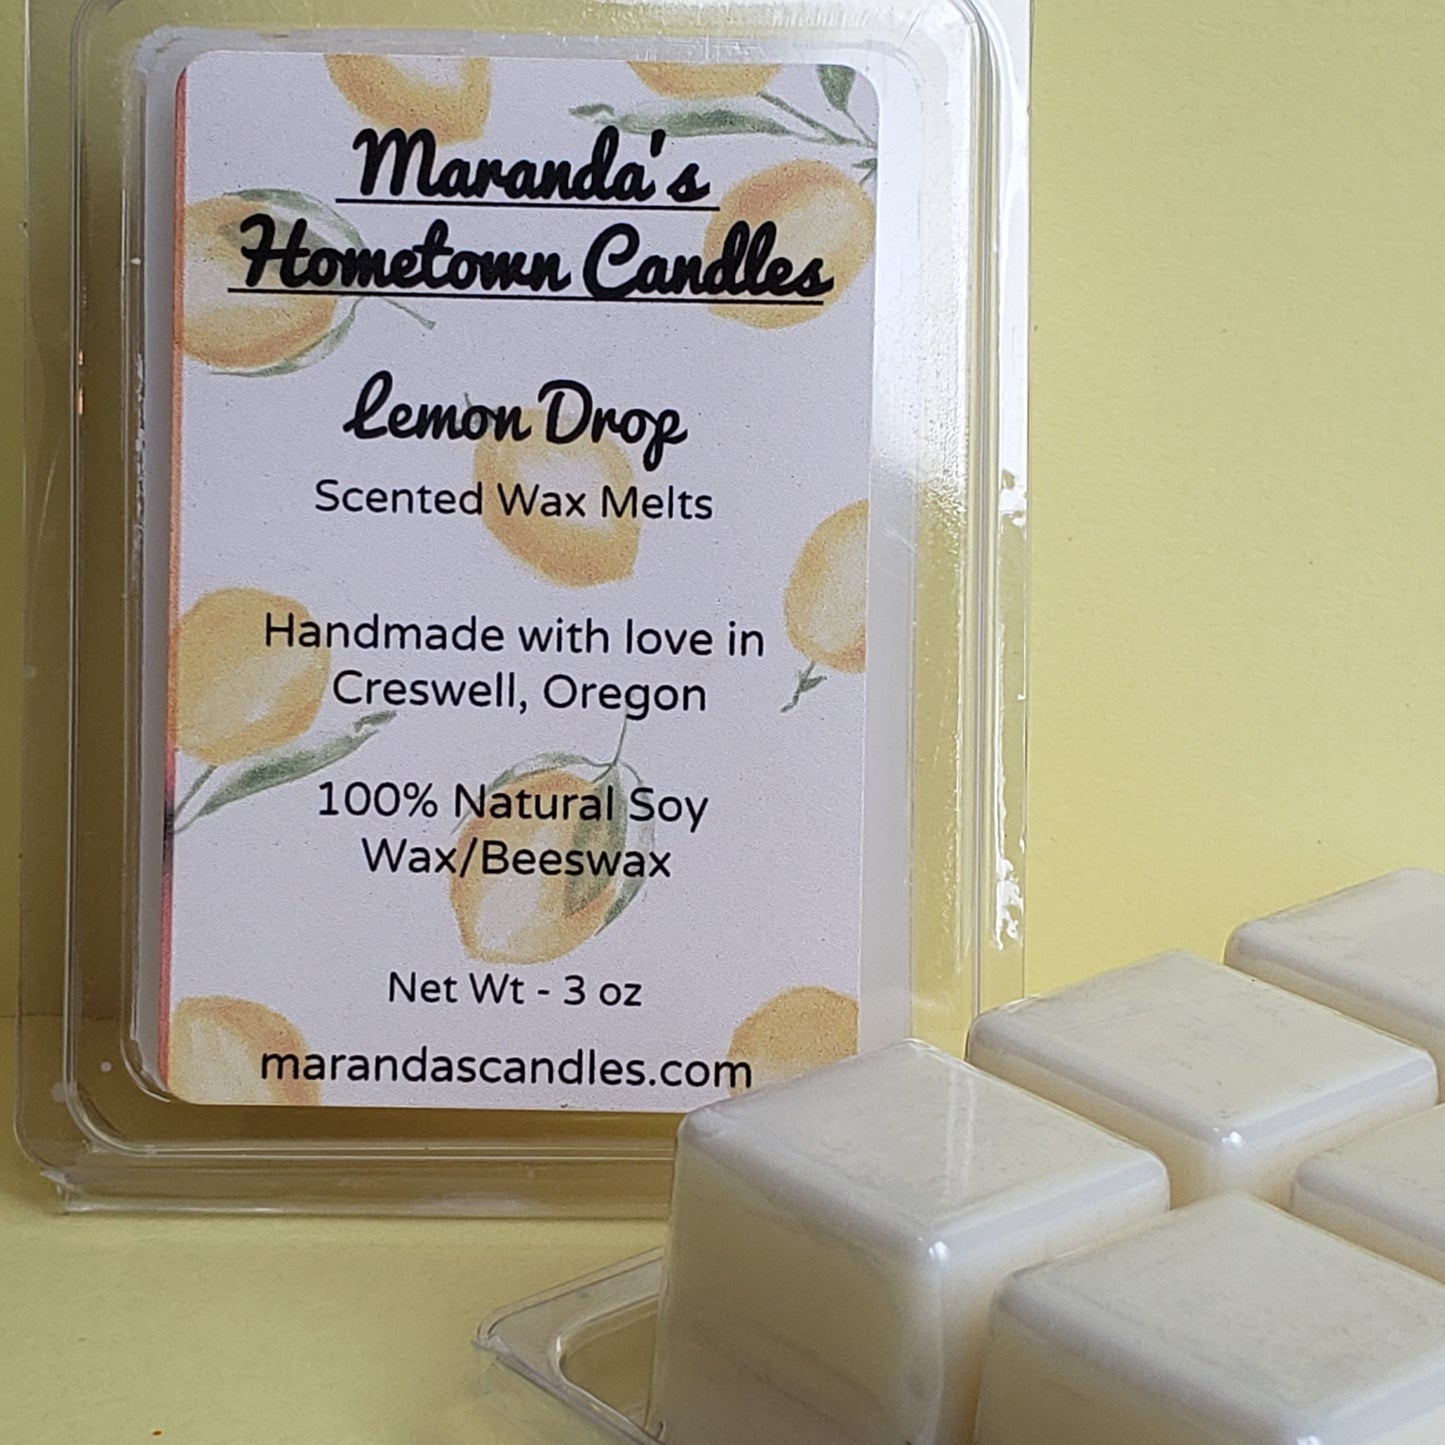 Lemon Drop Scented Soy Wax Candle/Wax melts